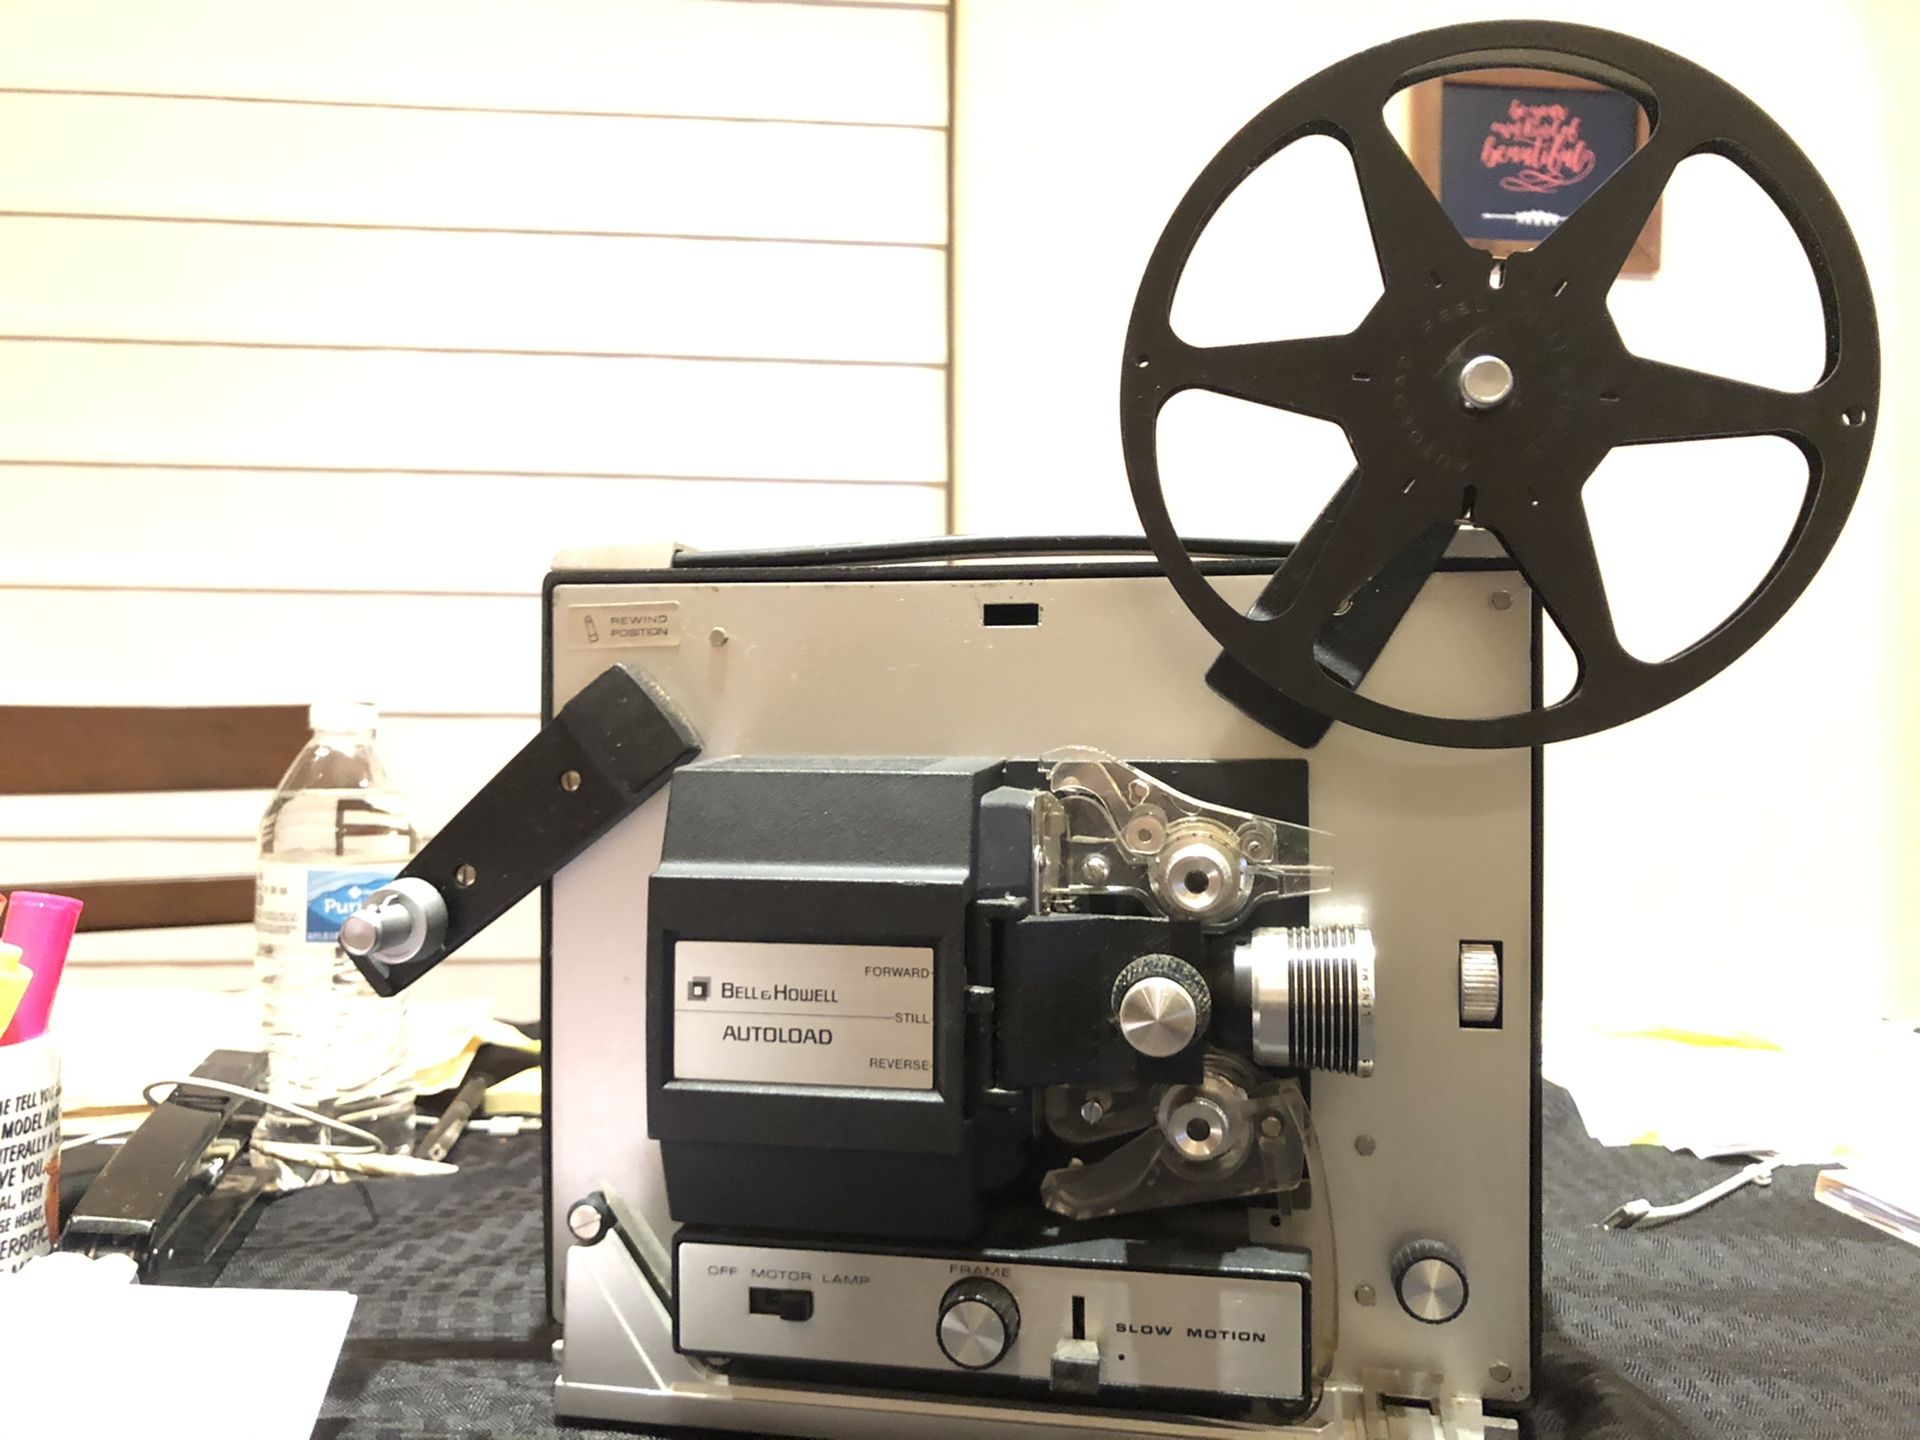 8 mm projector and video camera